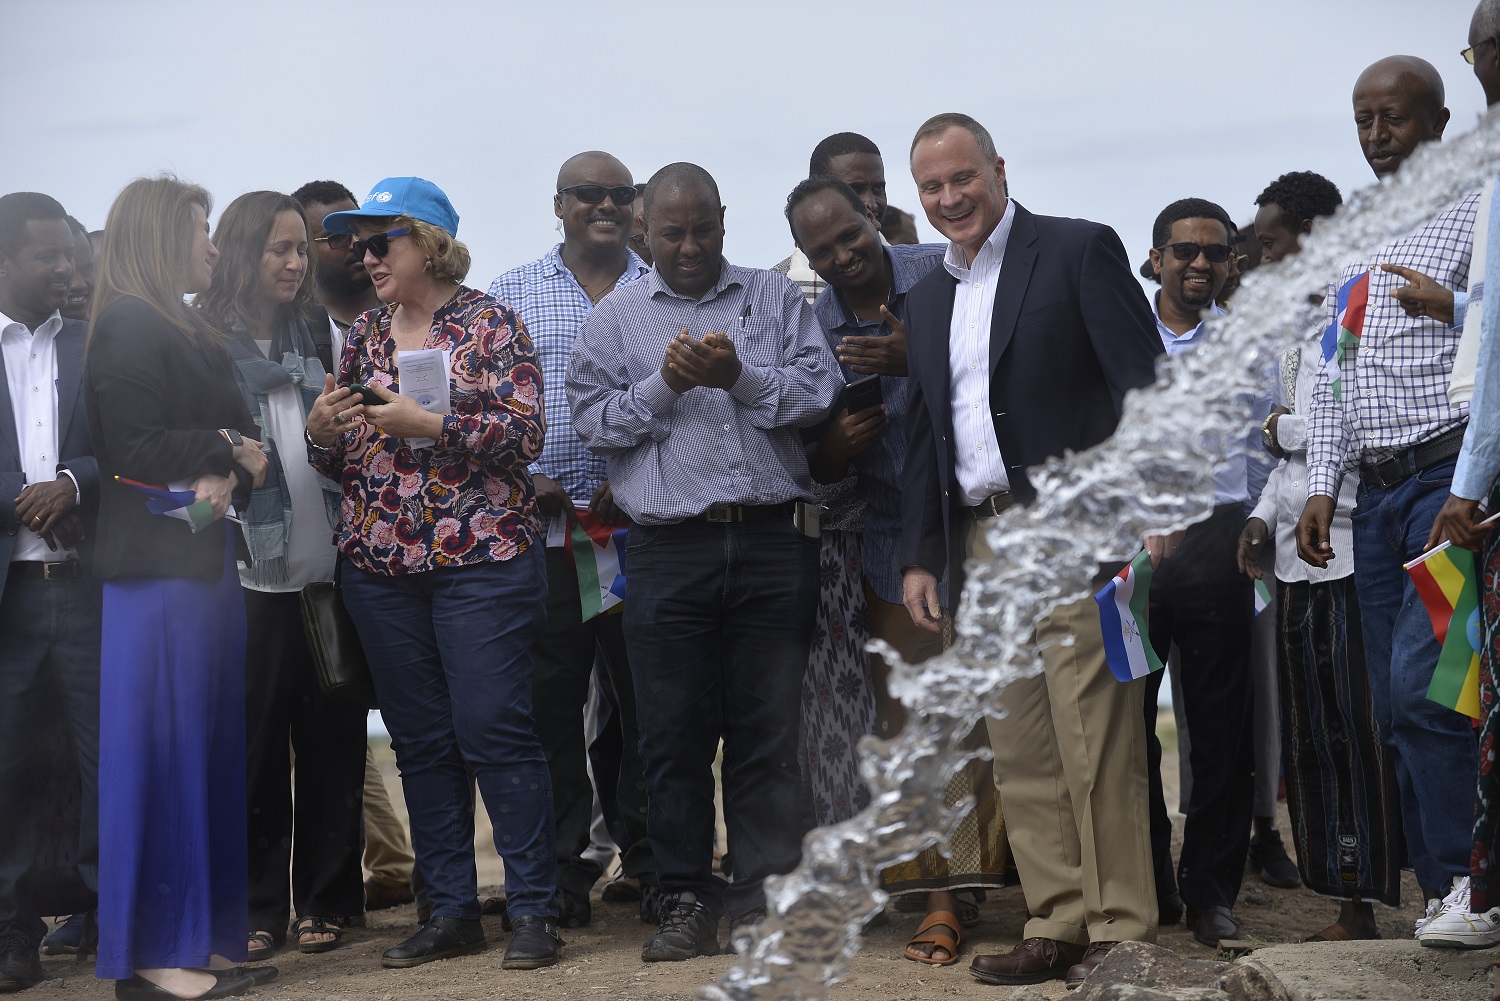 The US Ambassador to Ethiopia, Michael Raynor, turned on the tap to make fresh water available in the village of Serdo.